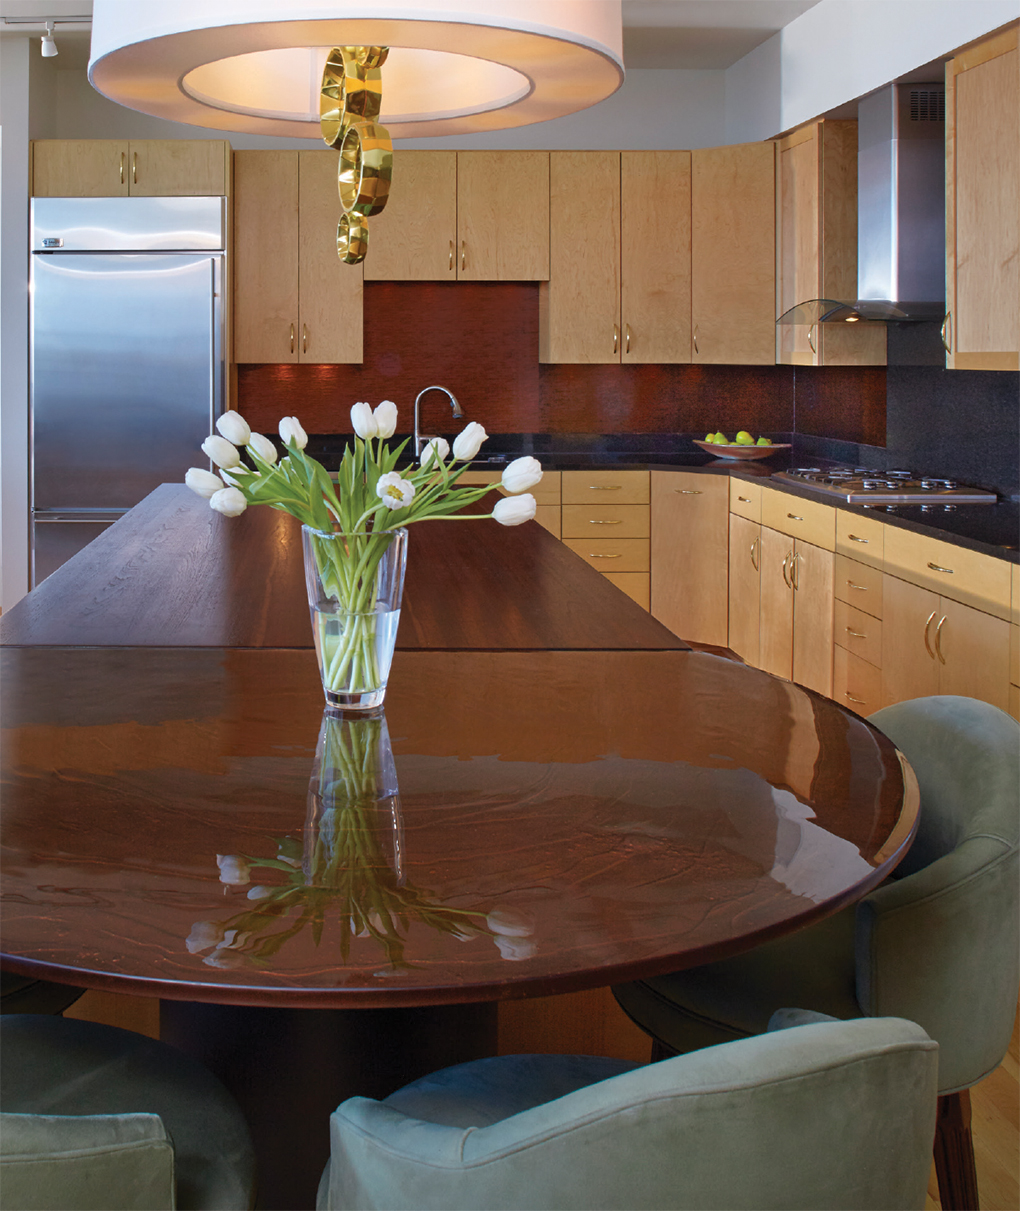 Kitchen and dining with dark wood tables and light wood cabinet space with stainless steel fridge